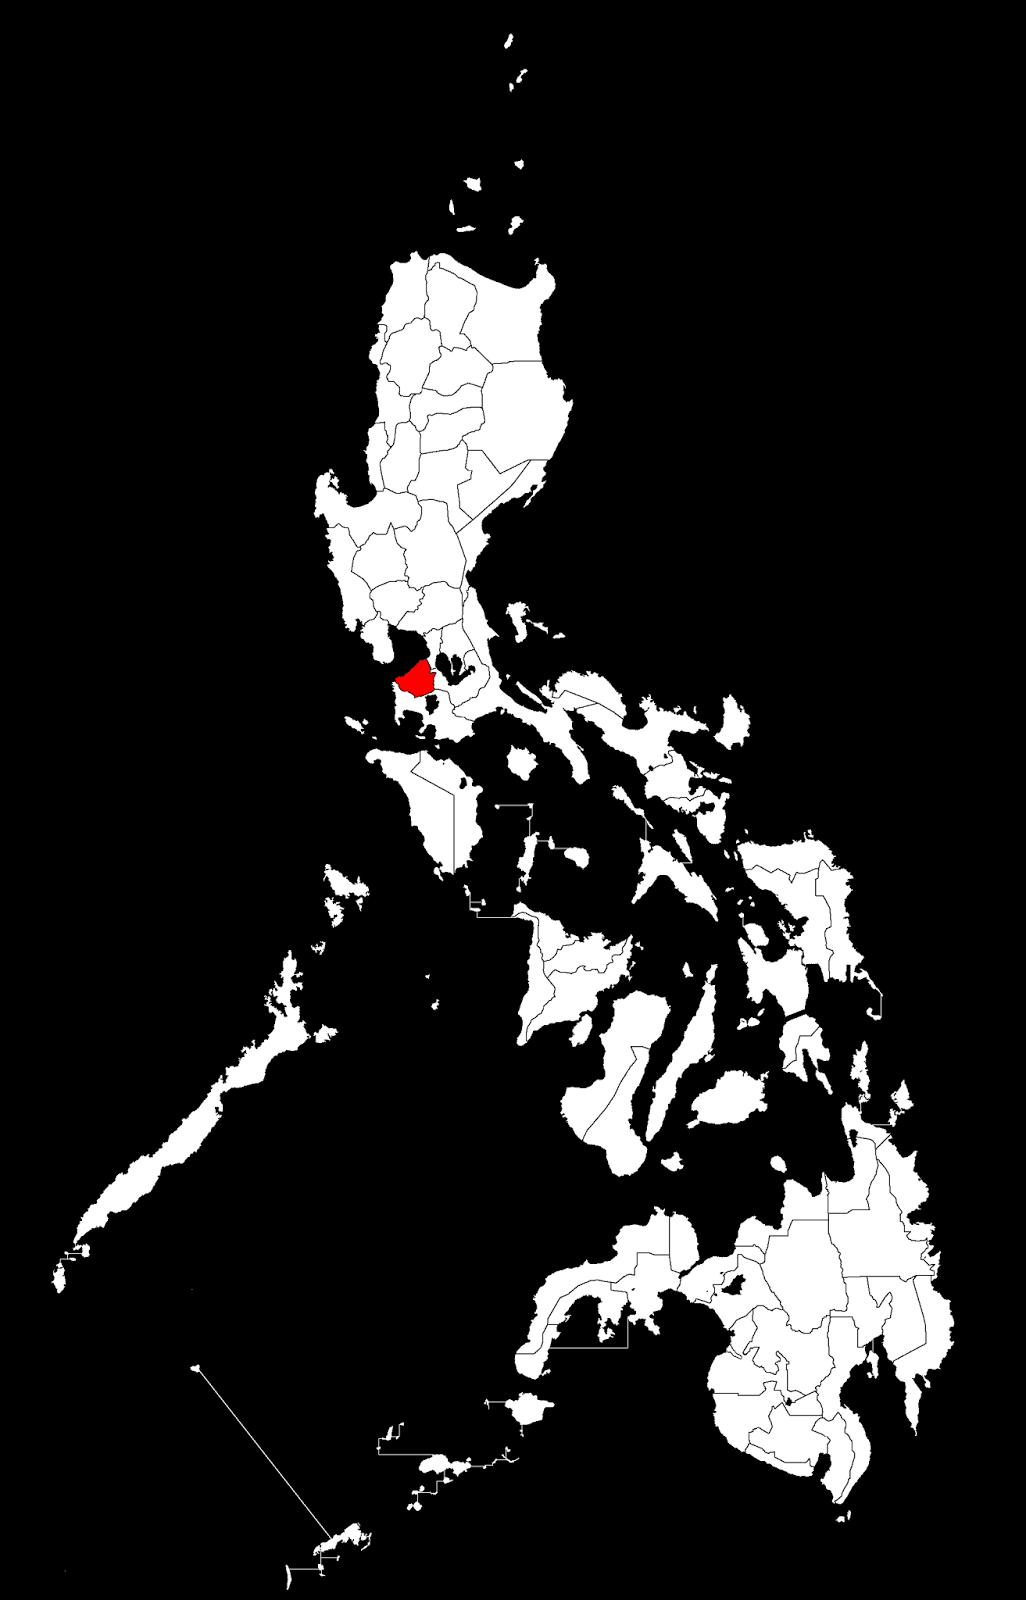 http://upload.wikimedia.org/wikipedia/commons/2/2a/Ph_regions_and_provinces.png